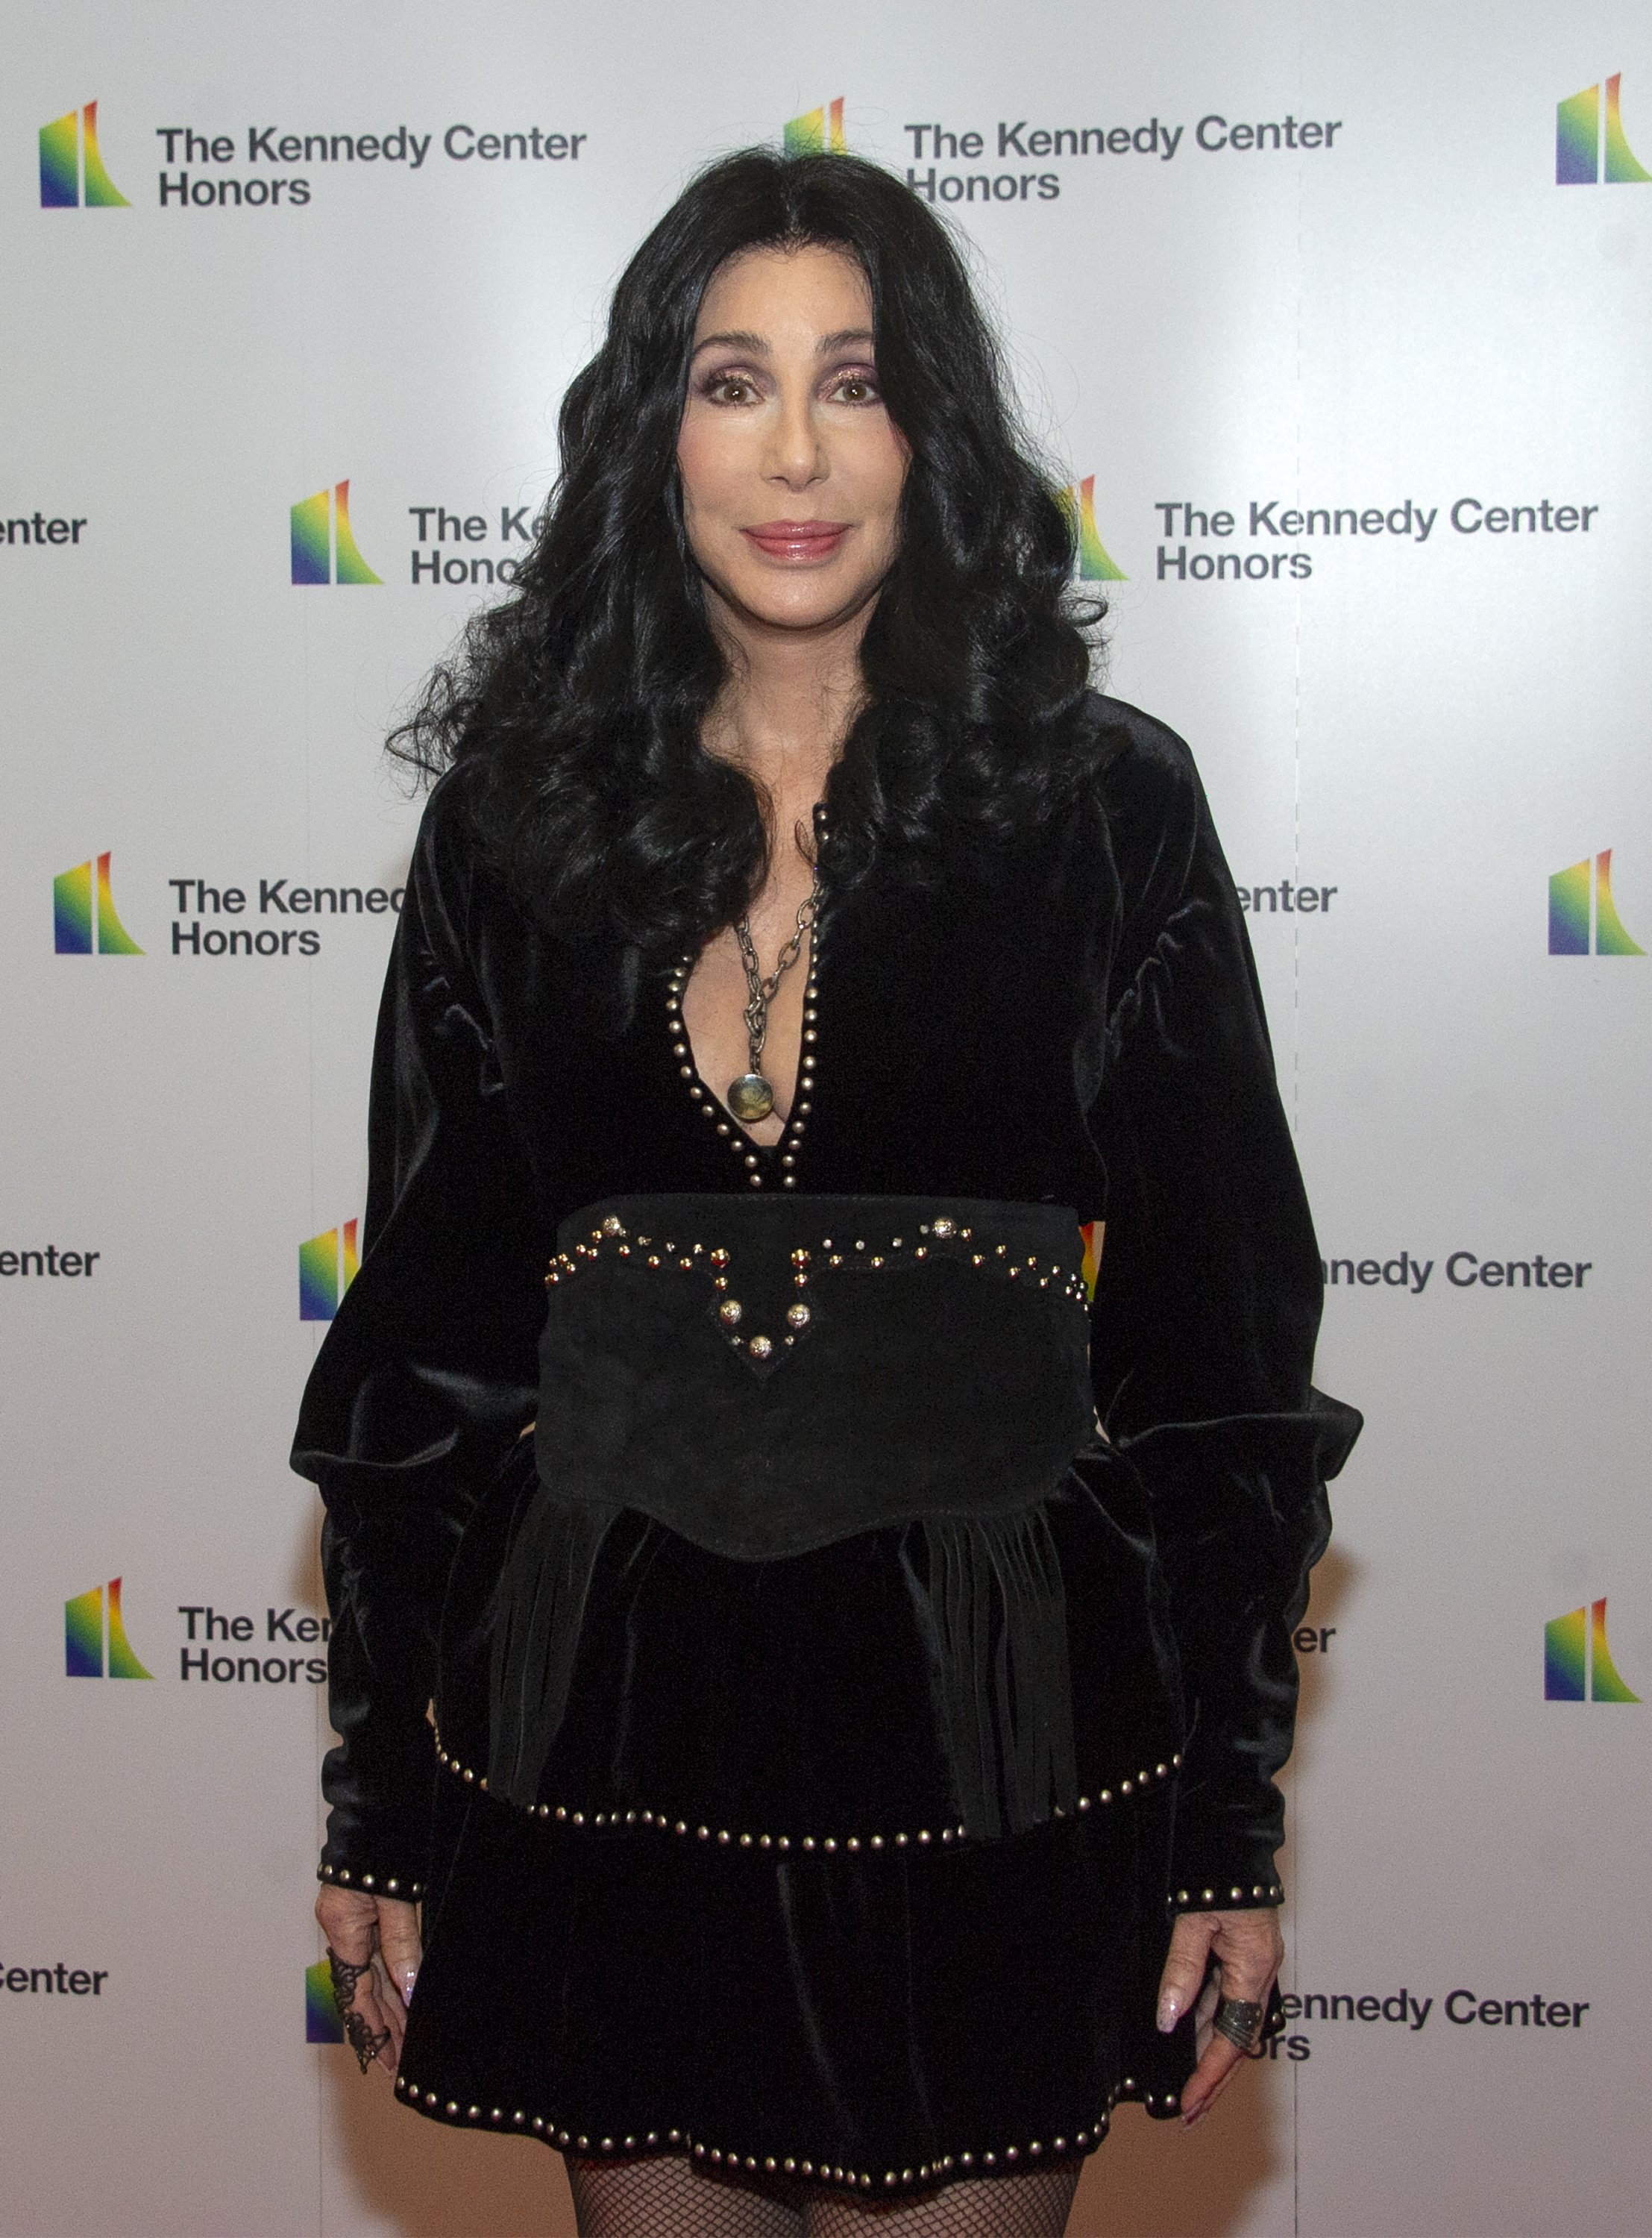 Cher arrives for the formal Artist's Dinner honoring the recipients of the 41st Annual Kennedy Center Honors in Washington, D.C. on Saturday, December 1, 2018. | Source: Getty Images